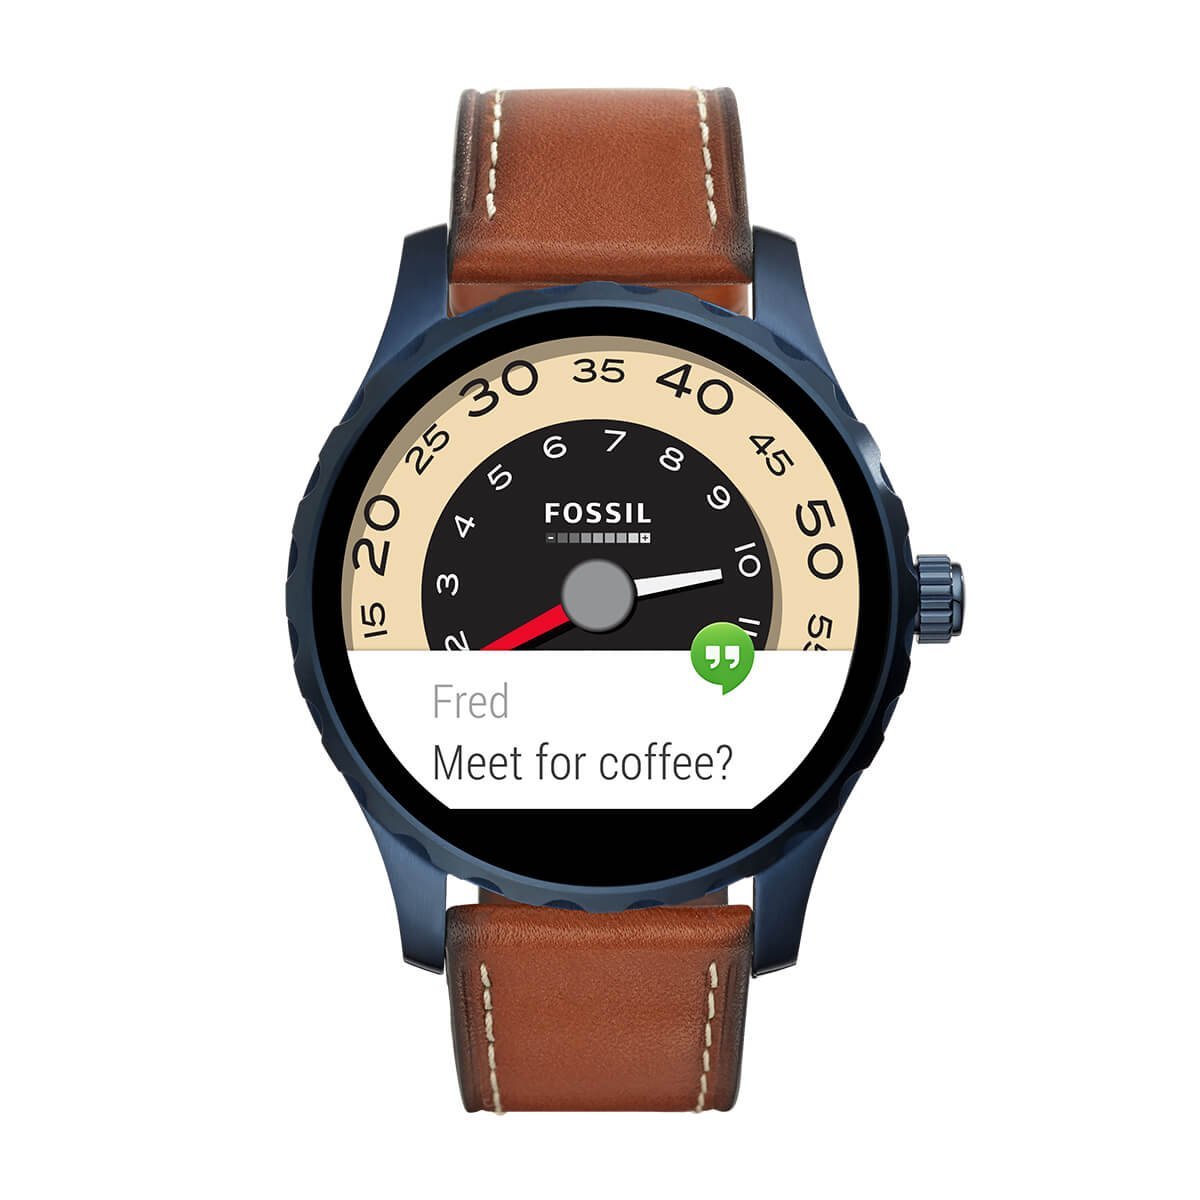 Smartwatch Caballero  Fossil Q Marshal Ftw2106